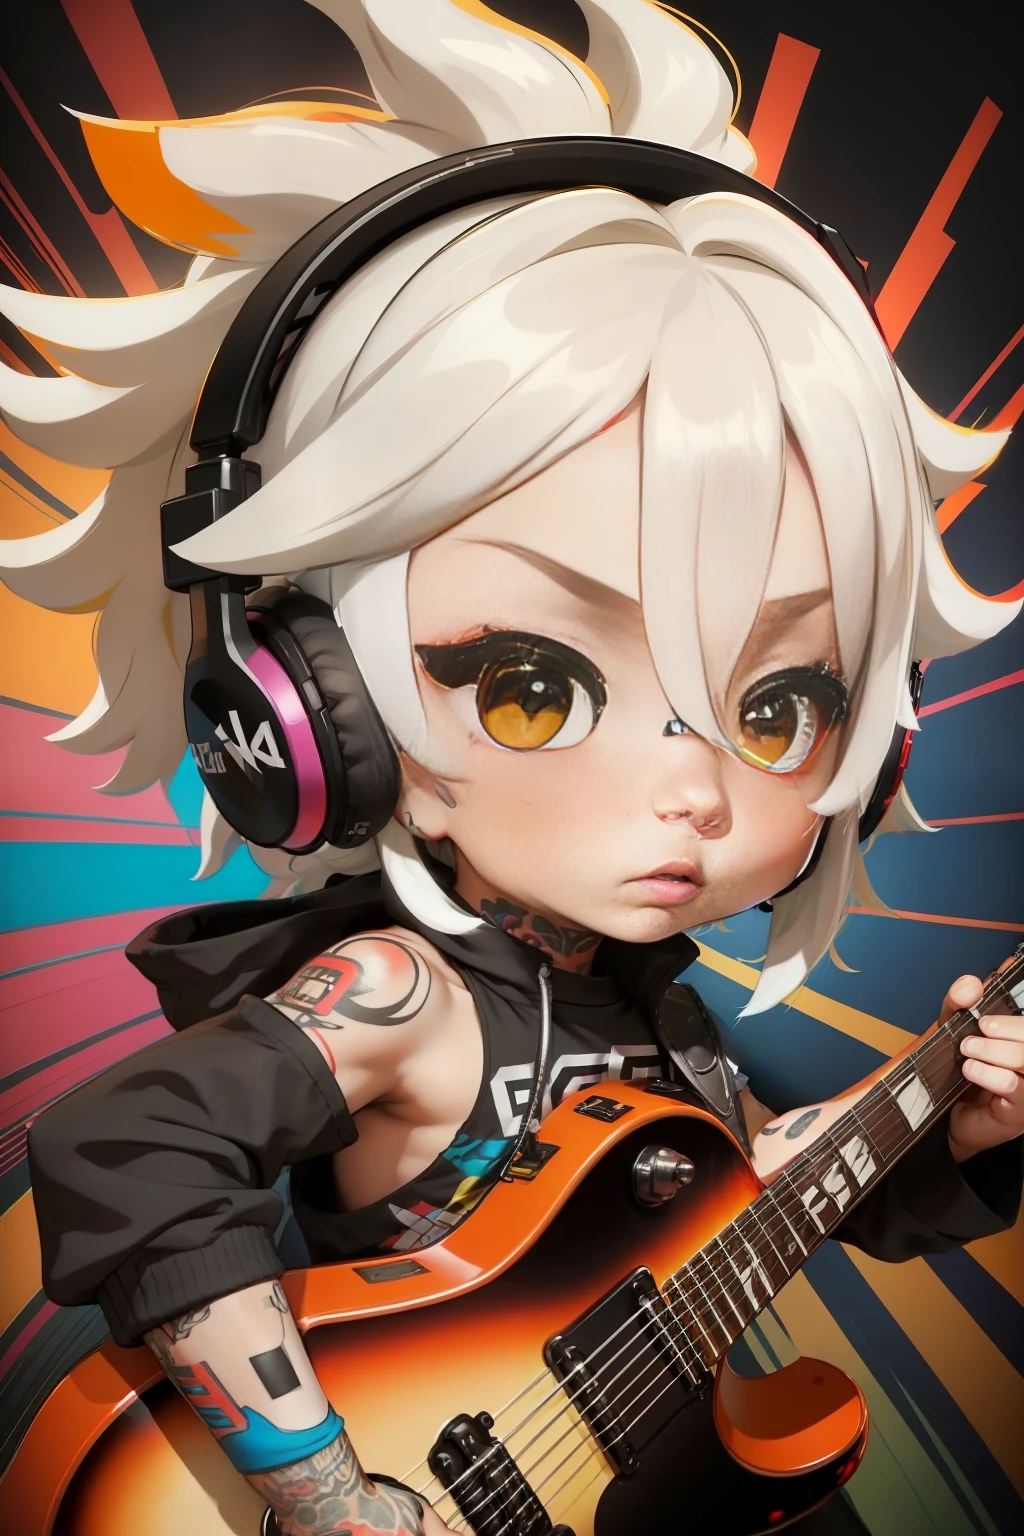 Raw 16k Ultra HD Vivid Colors Masterpiece Ultra Resolution Cinematic Digital Art, Chibi Style, A Cute Boy Big Head, Big Light Brown Eyes, White Hair, Wearing Rock Clothes, Tattoo on Arm, Playing Colorful Electric Guitar, Using Gamer Headset, Set of a Recording Studio. Vivid colors, vibrant colors, spicy colors, cinematic colors.